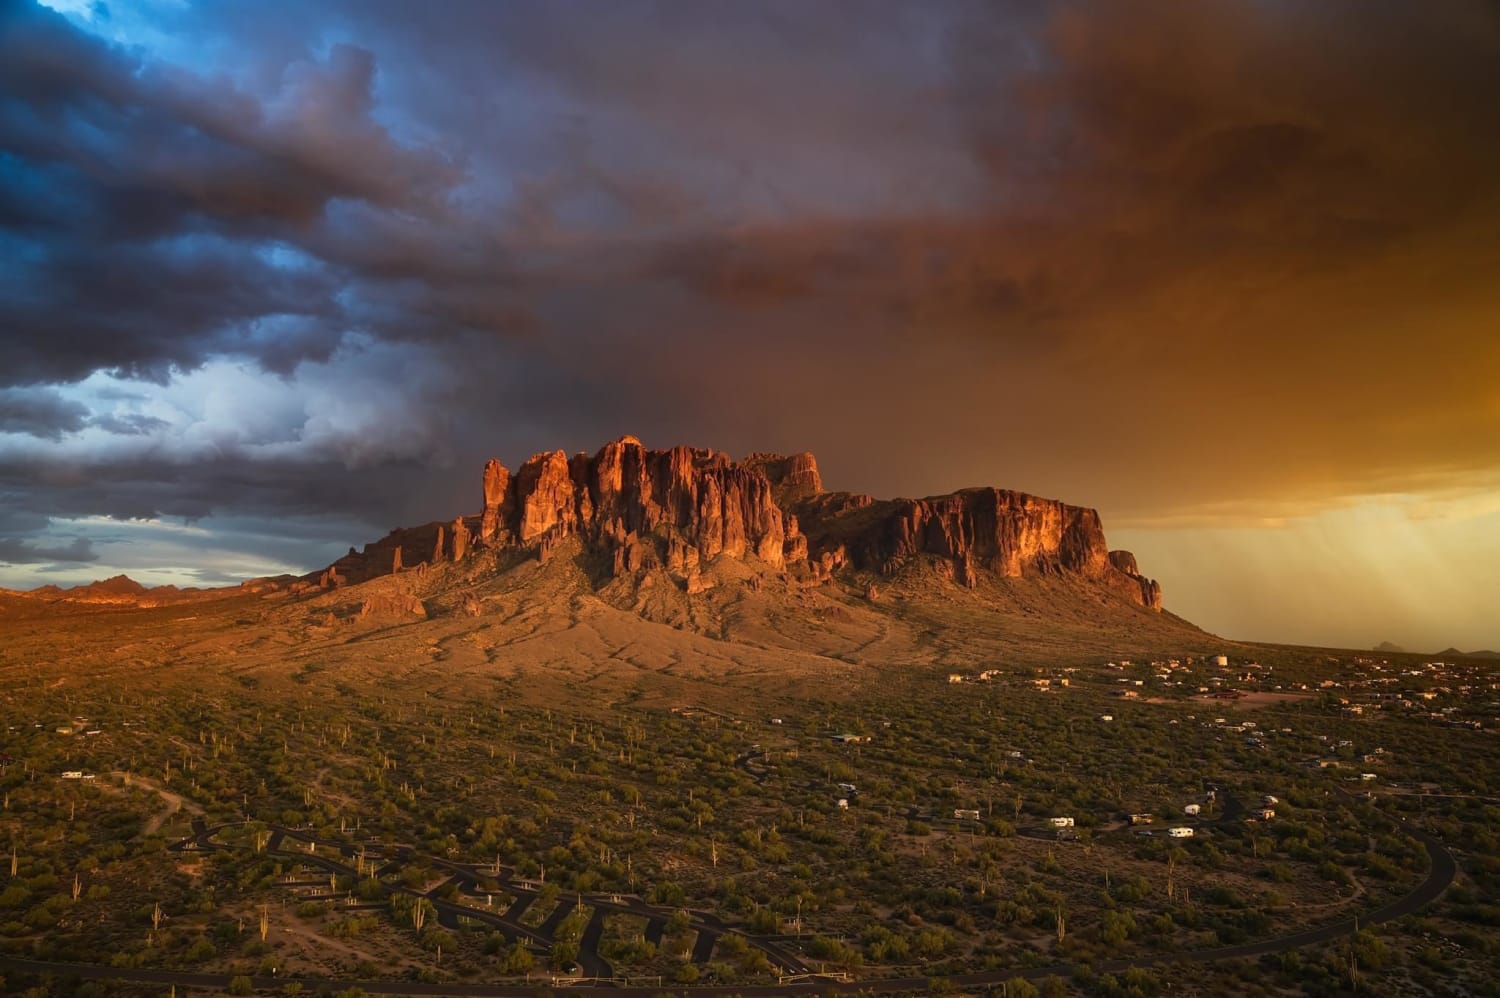 The Superstition Mountains, just east of Phoenix, Arizona.